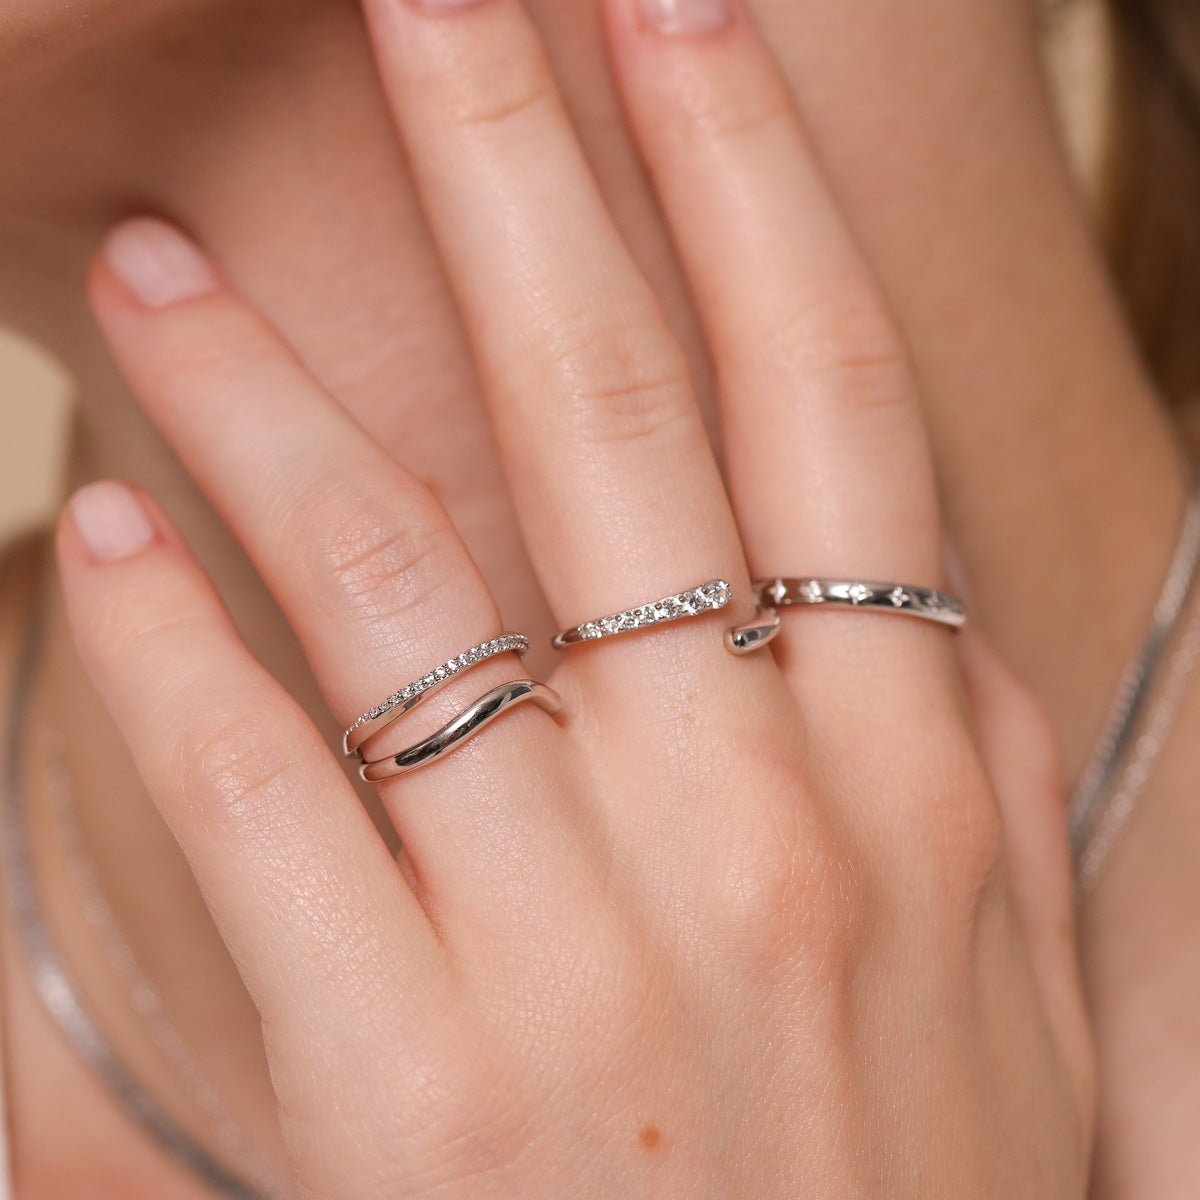 Orbit Crystal Ring in Silver worn with other rings